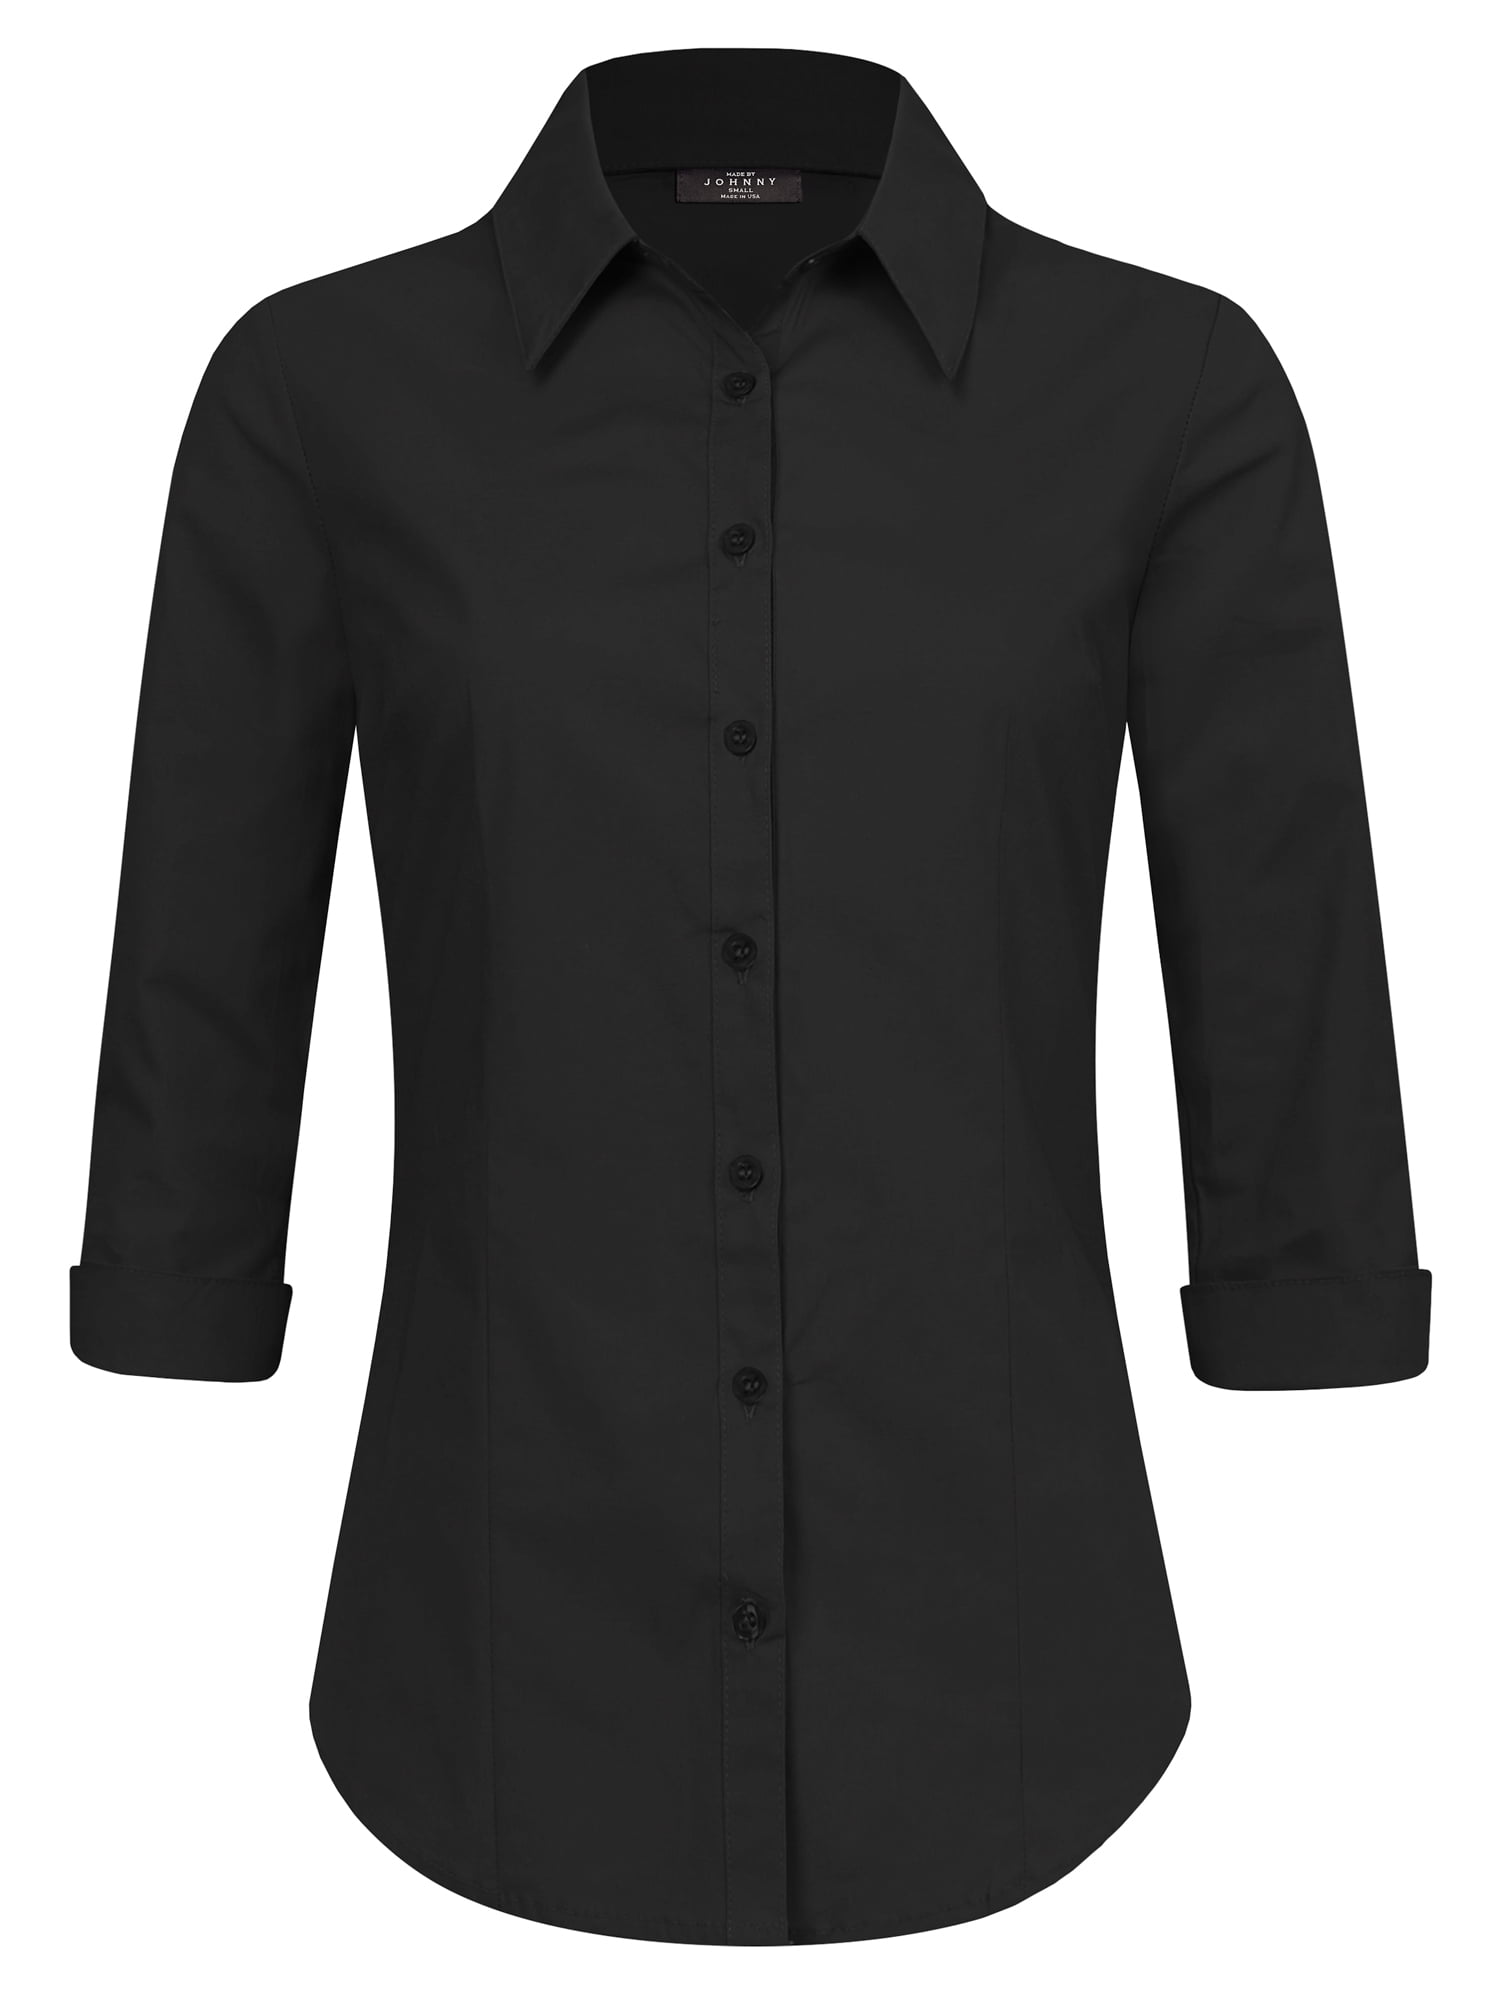 Made by Johnny Women's 3/4 Sleeve Tailored Button Down Shirts S BLACK 